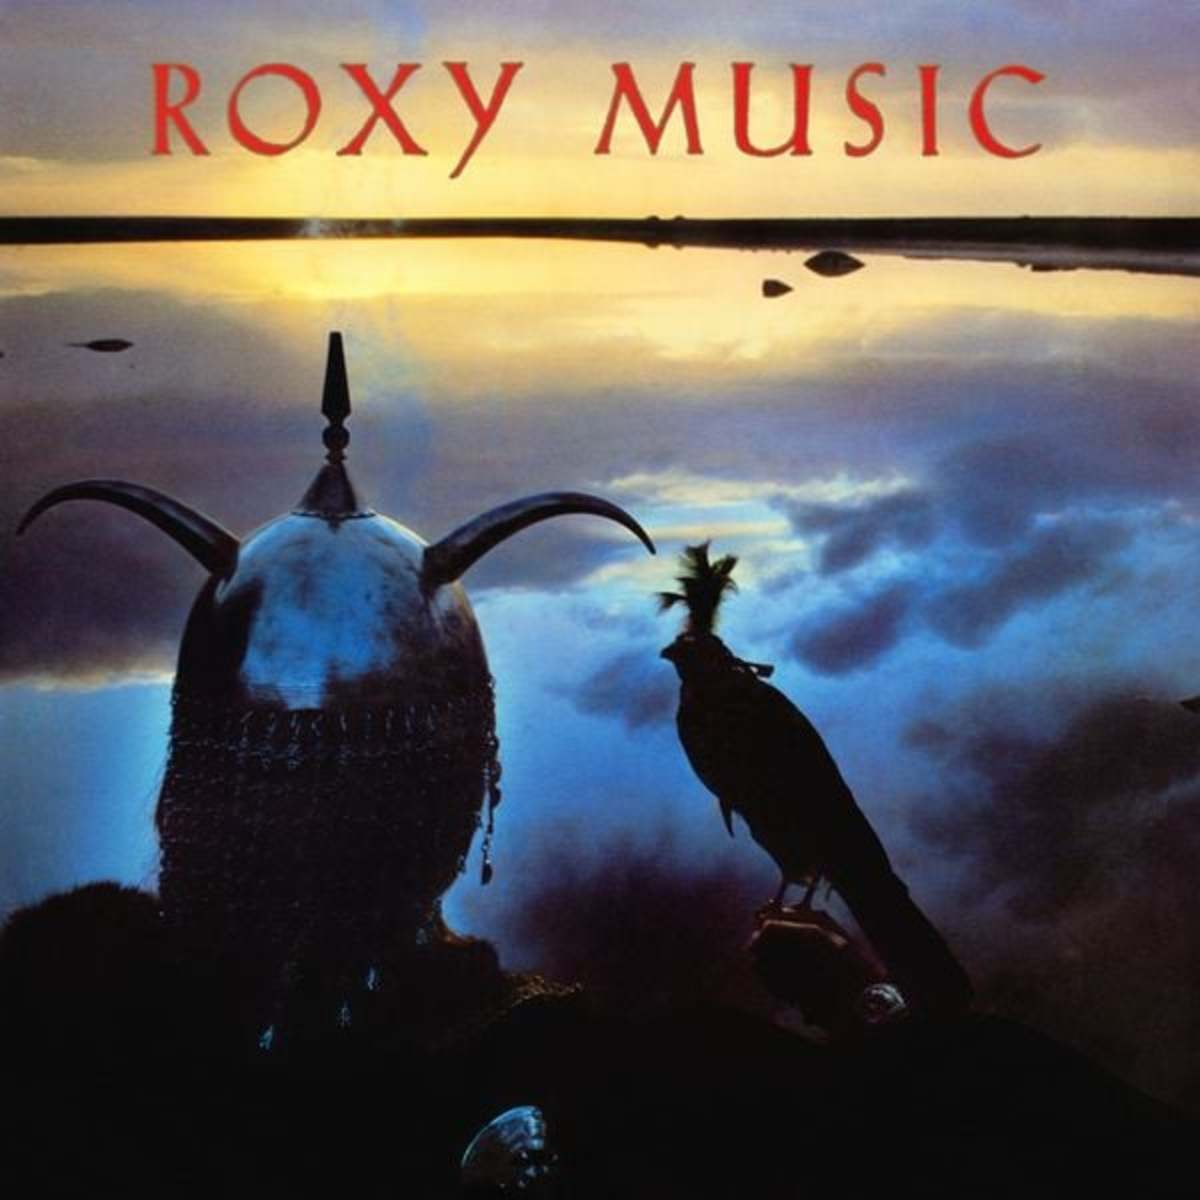 What Was Thematically Attractive About Roxy Music's 